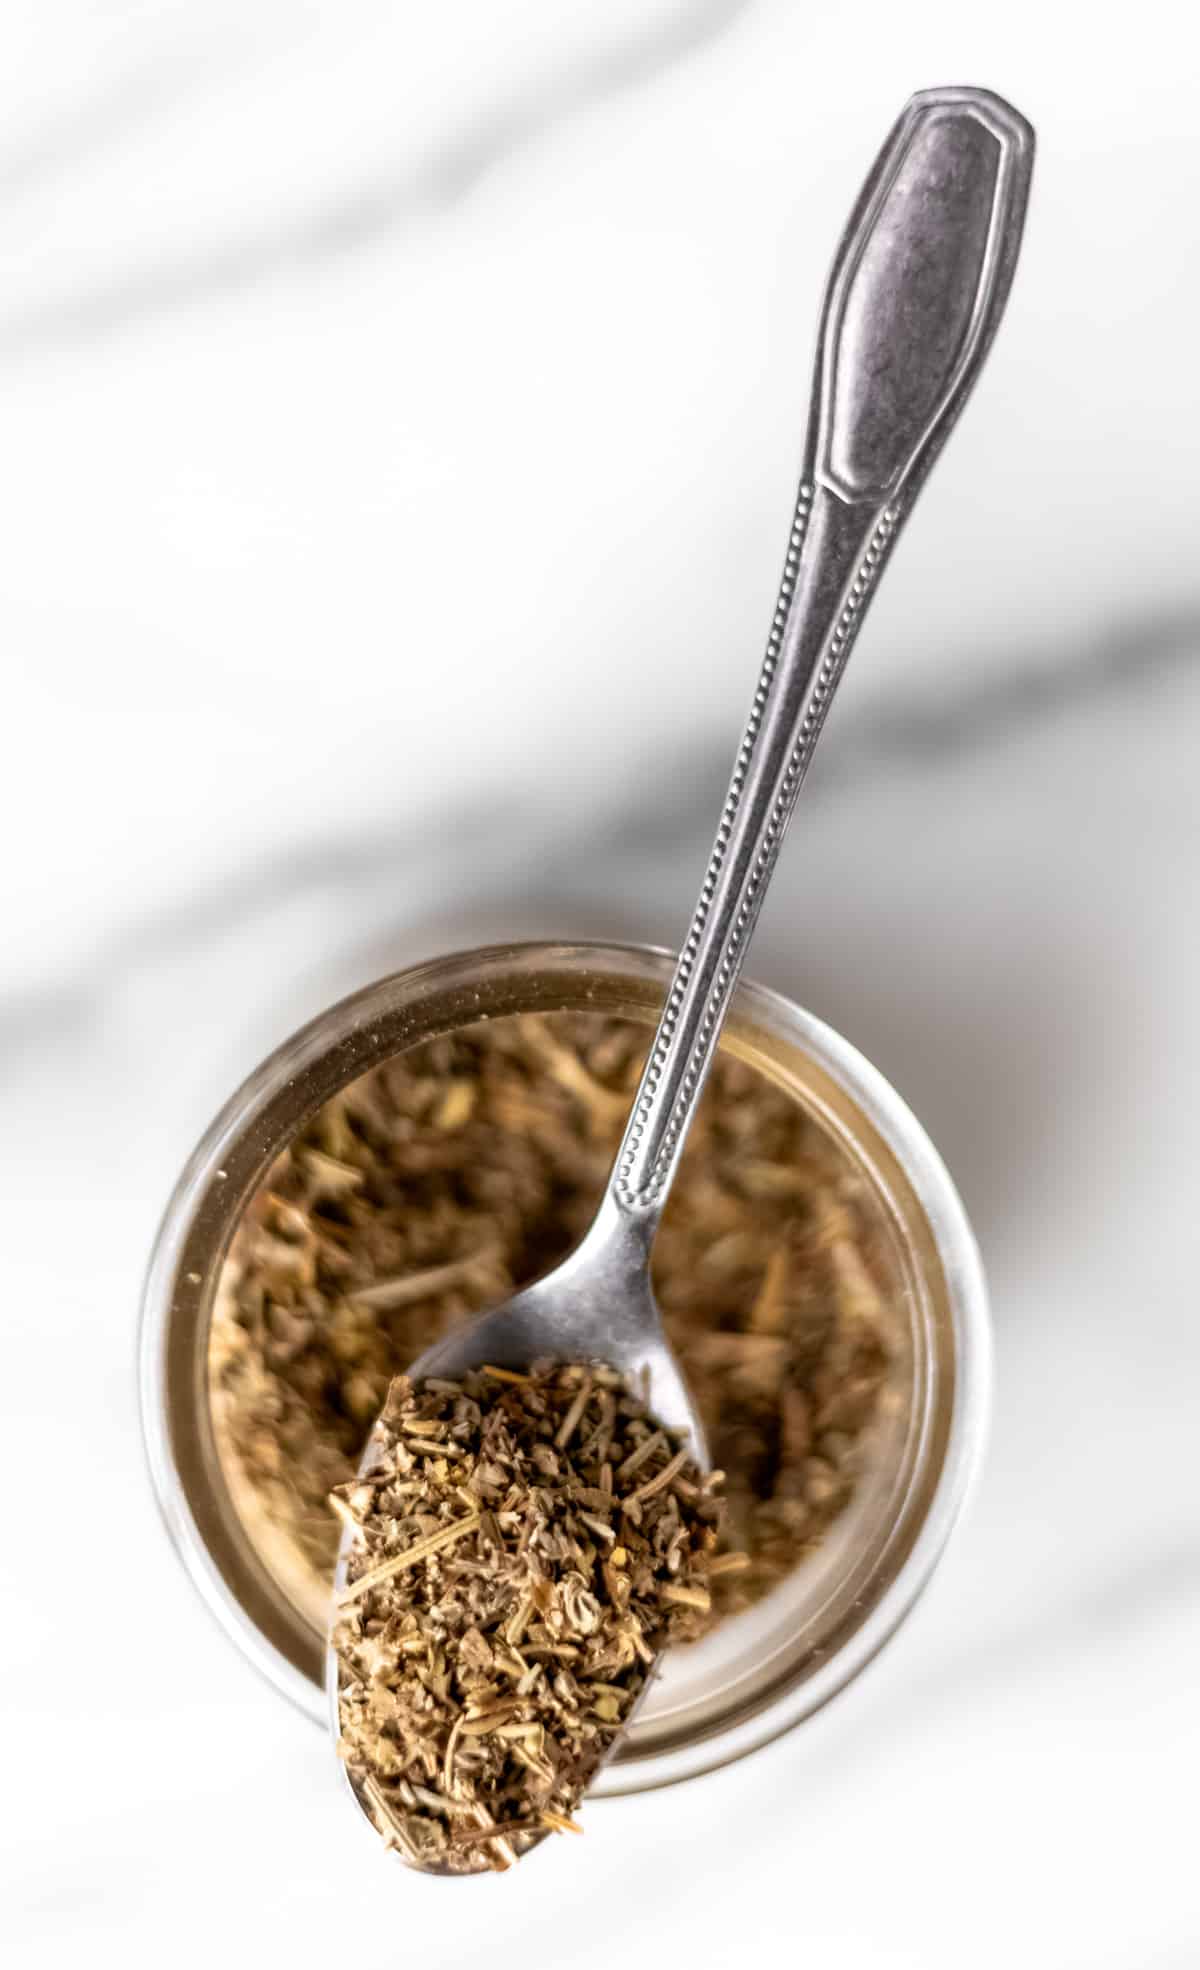 A spoonful of Italian seasoning sitting on top of a glass spice jar.